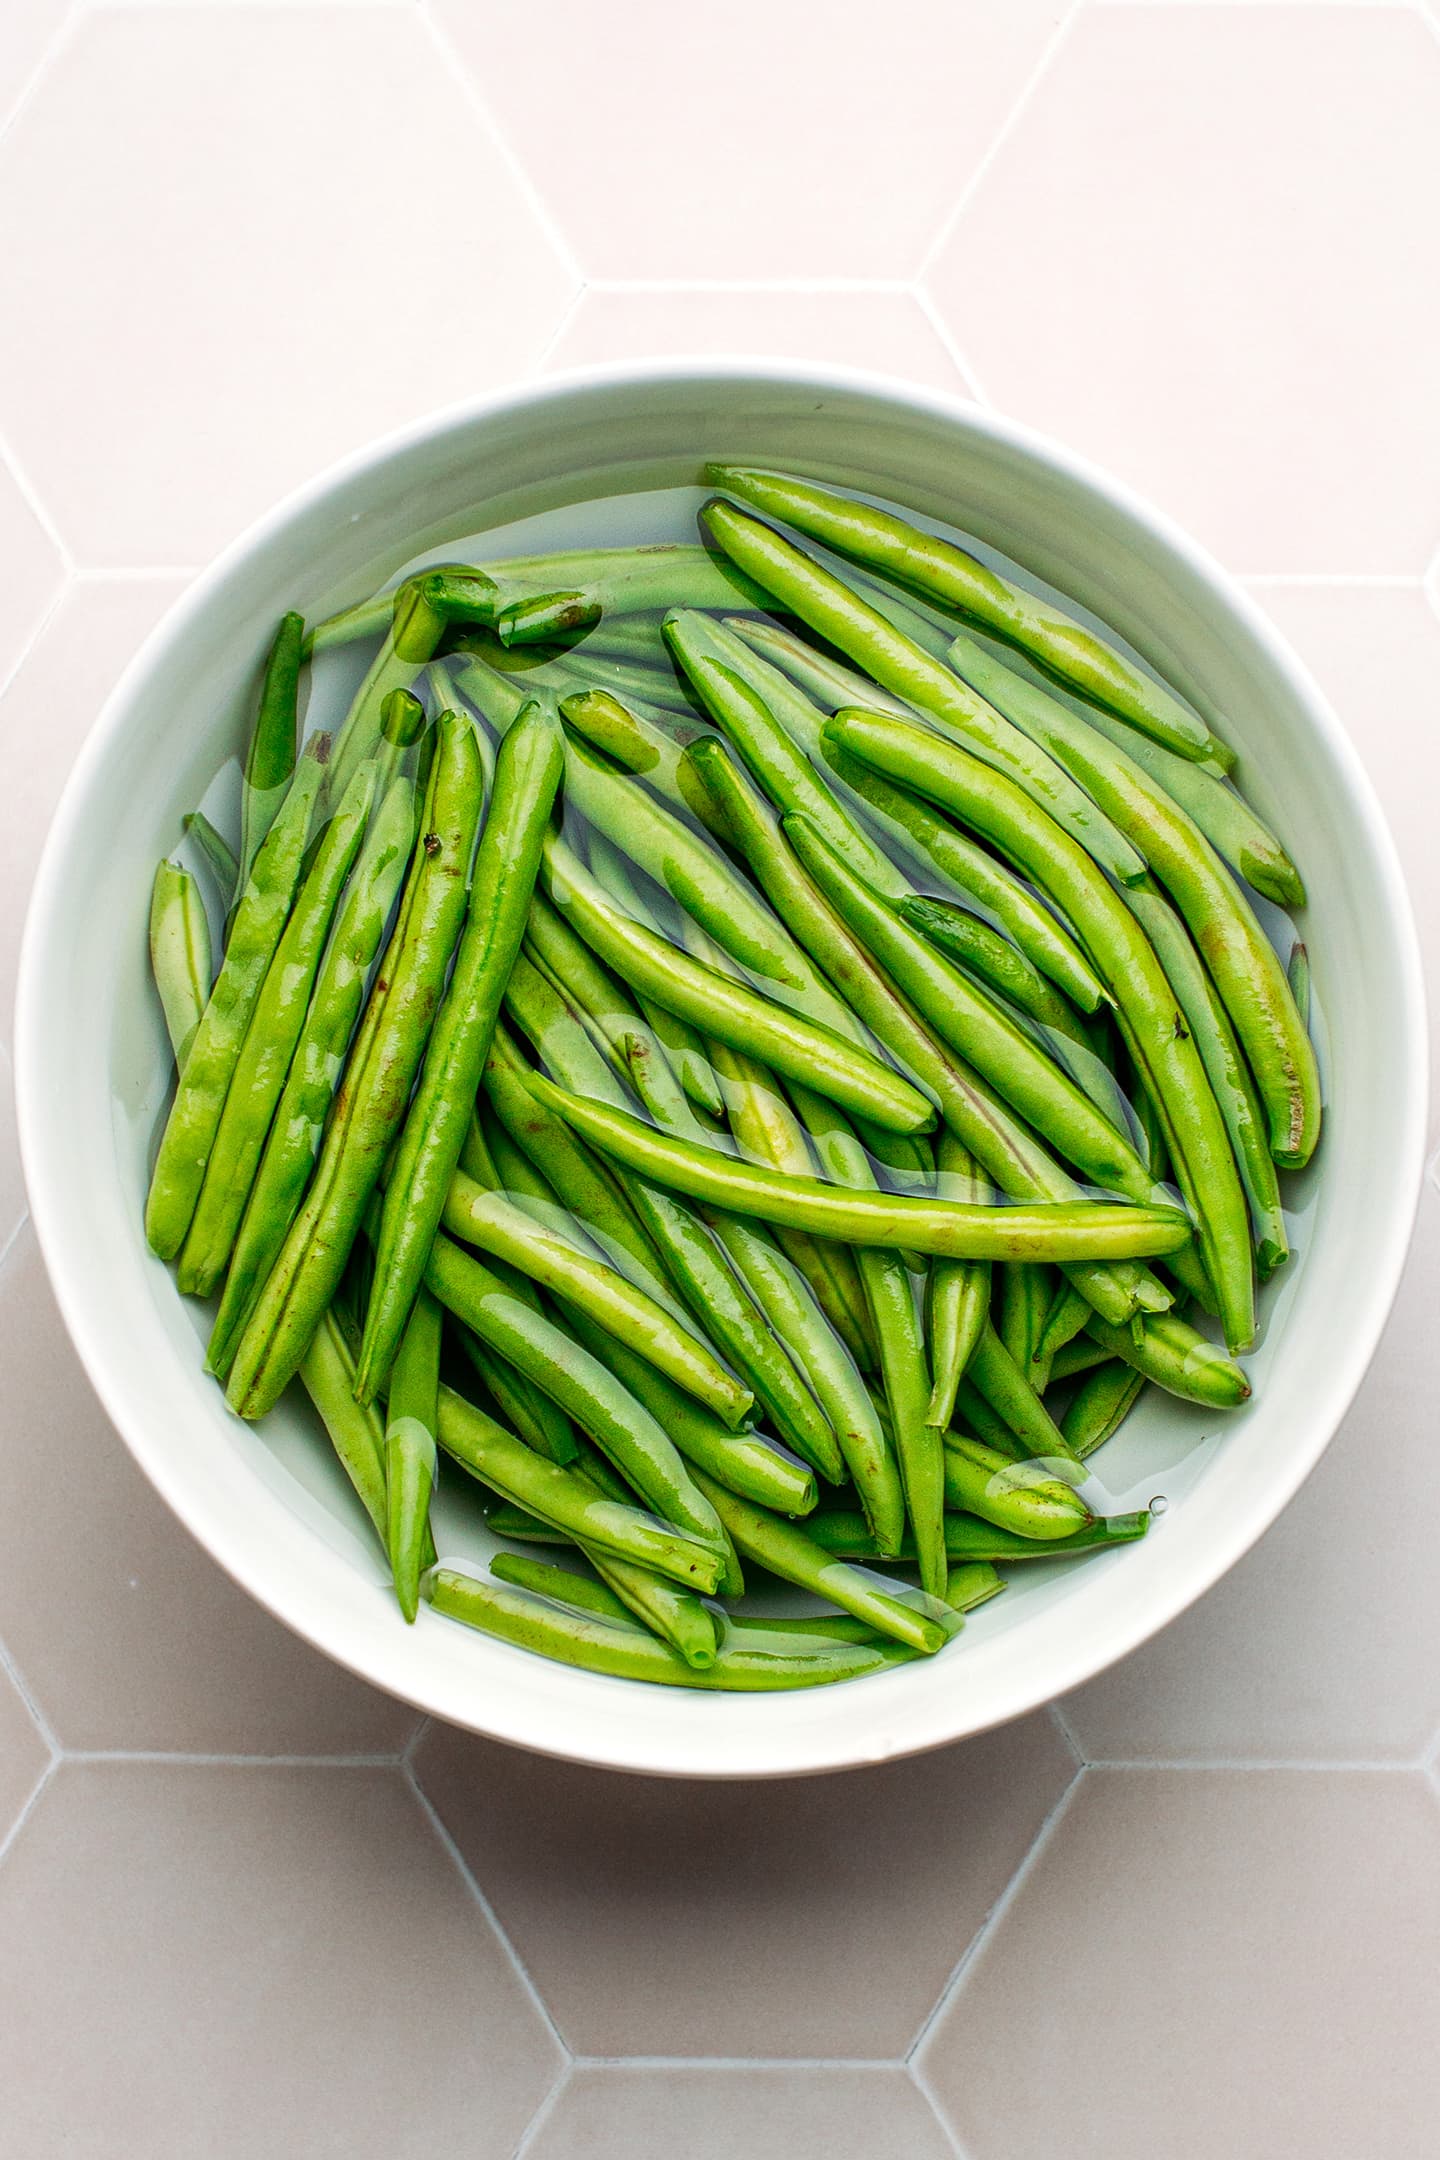 Green beans in a bowl of water.